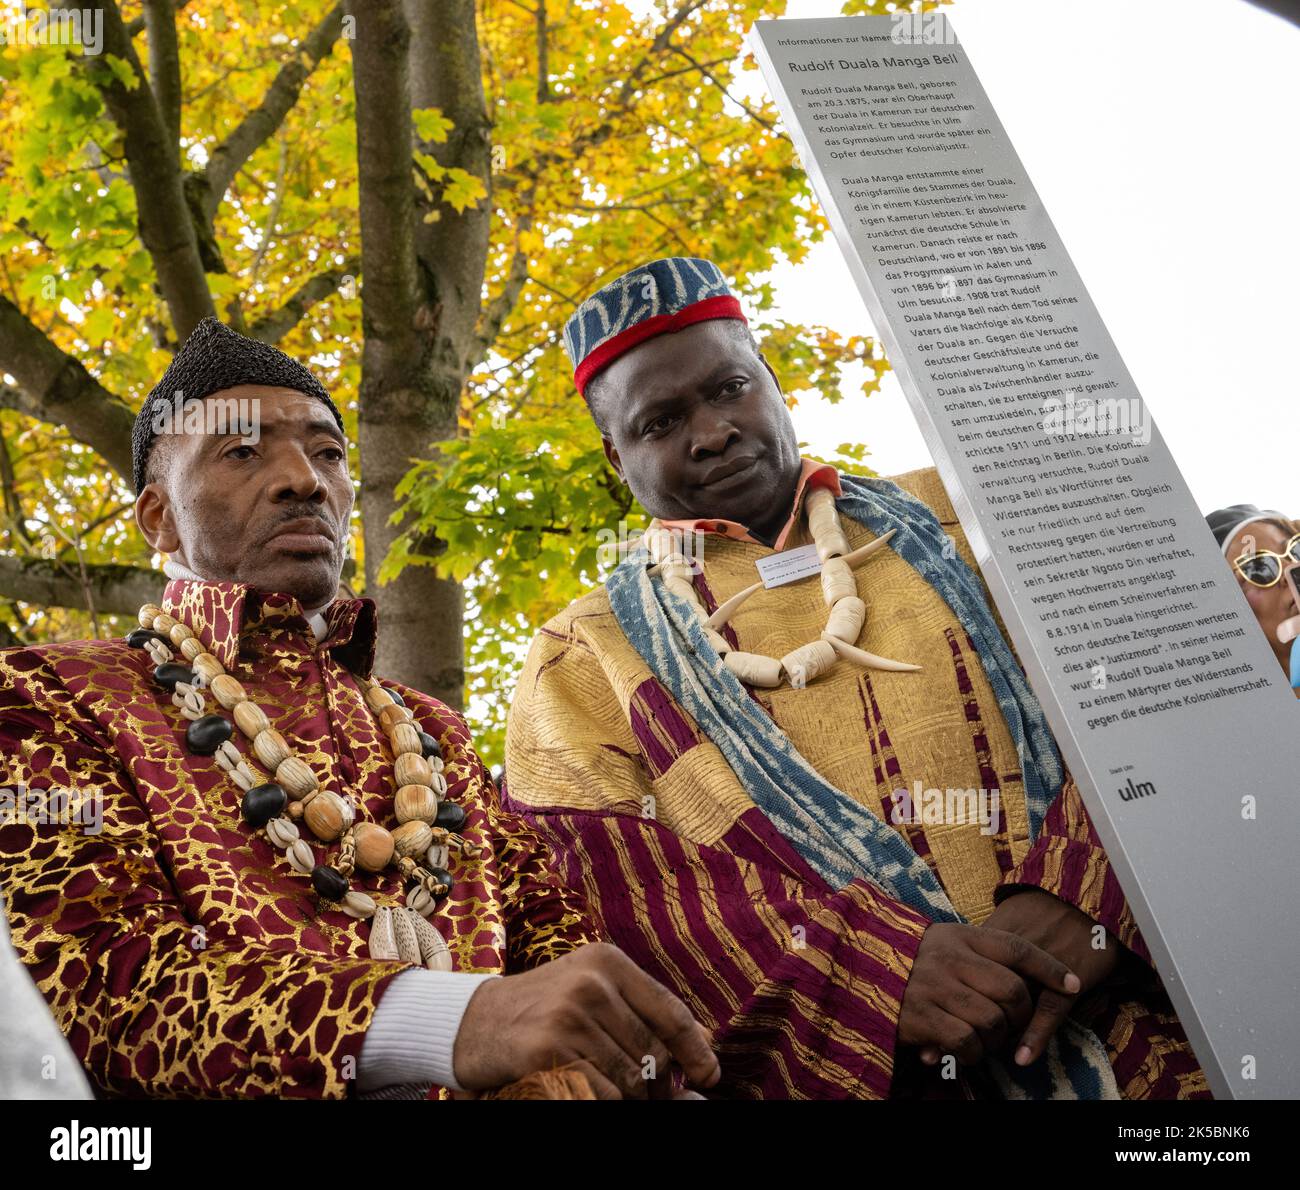 Ulm, Germany. 07th Oct, 2022. King Jean-Yves Eboumbou Douala Bell (l) from Cameroon stands with Guy. Klouemo, representative of the King of Bangoua, next to a stele. By naming the square near the new justice building, the city commemorates Rudolf Duala Manga Bell, who went to school in Ulm for a few years at the end of the 19th century before returning to his homeland and - as king of his people - being executed by the German colonial administration in 1914 after a mock trial. Credit: Stefan Puchner/dpa/Alamy Live News Stock Photo